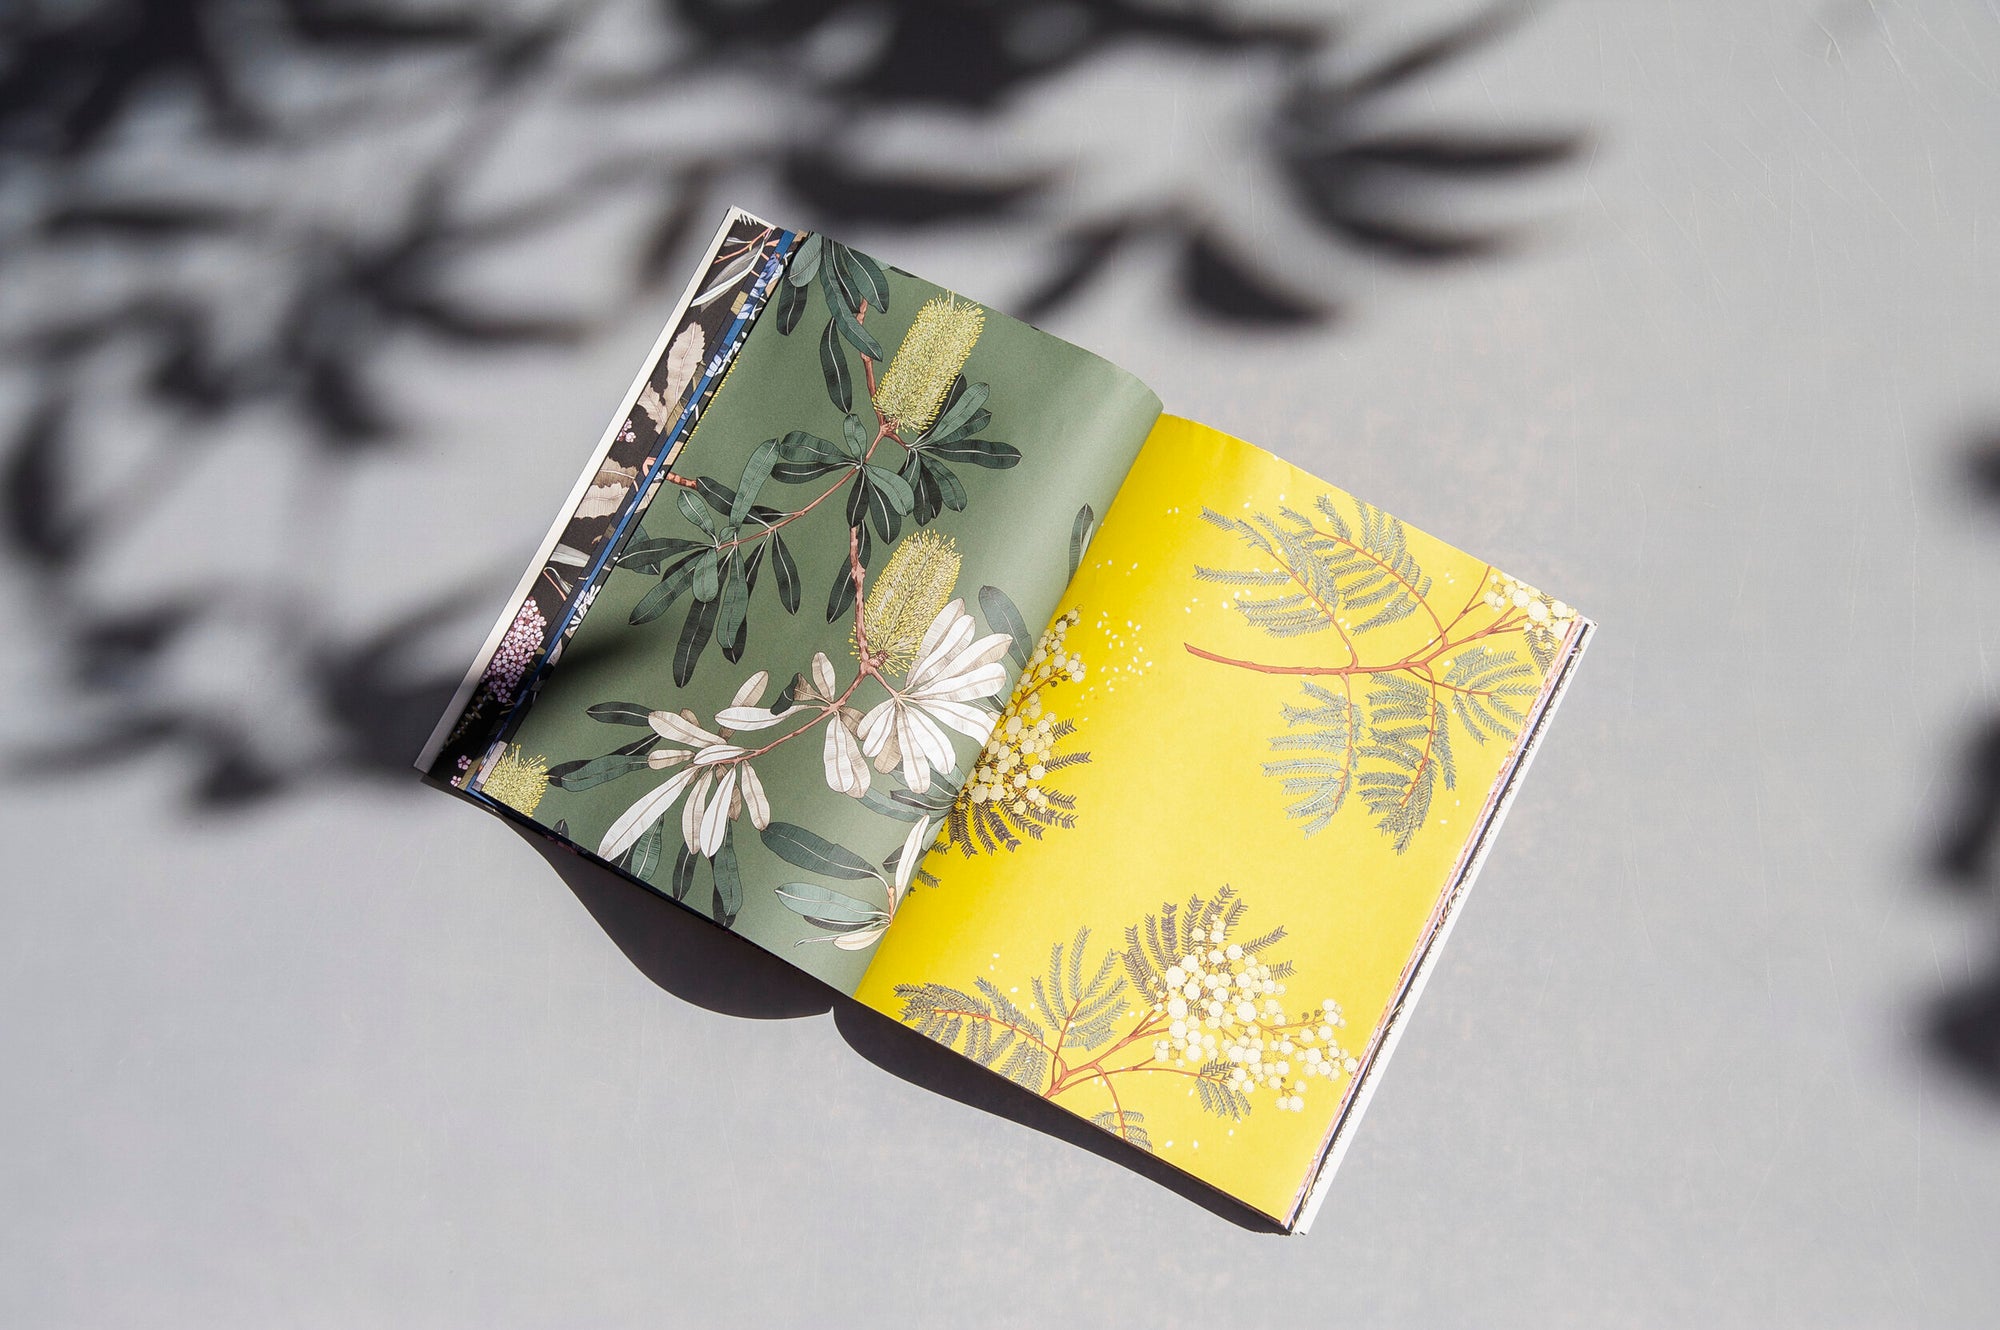 Botanicals by Edith Rewa: A Wrapping Paper Book